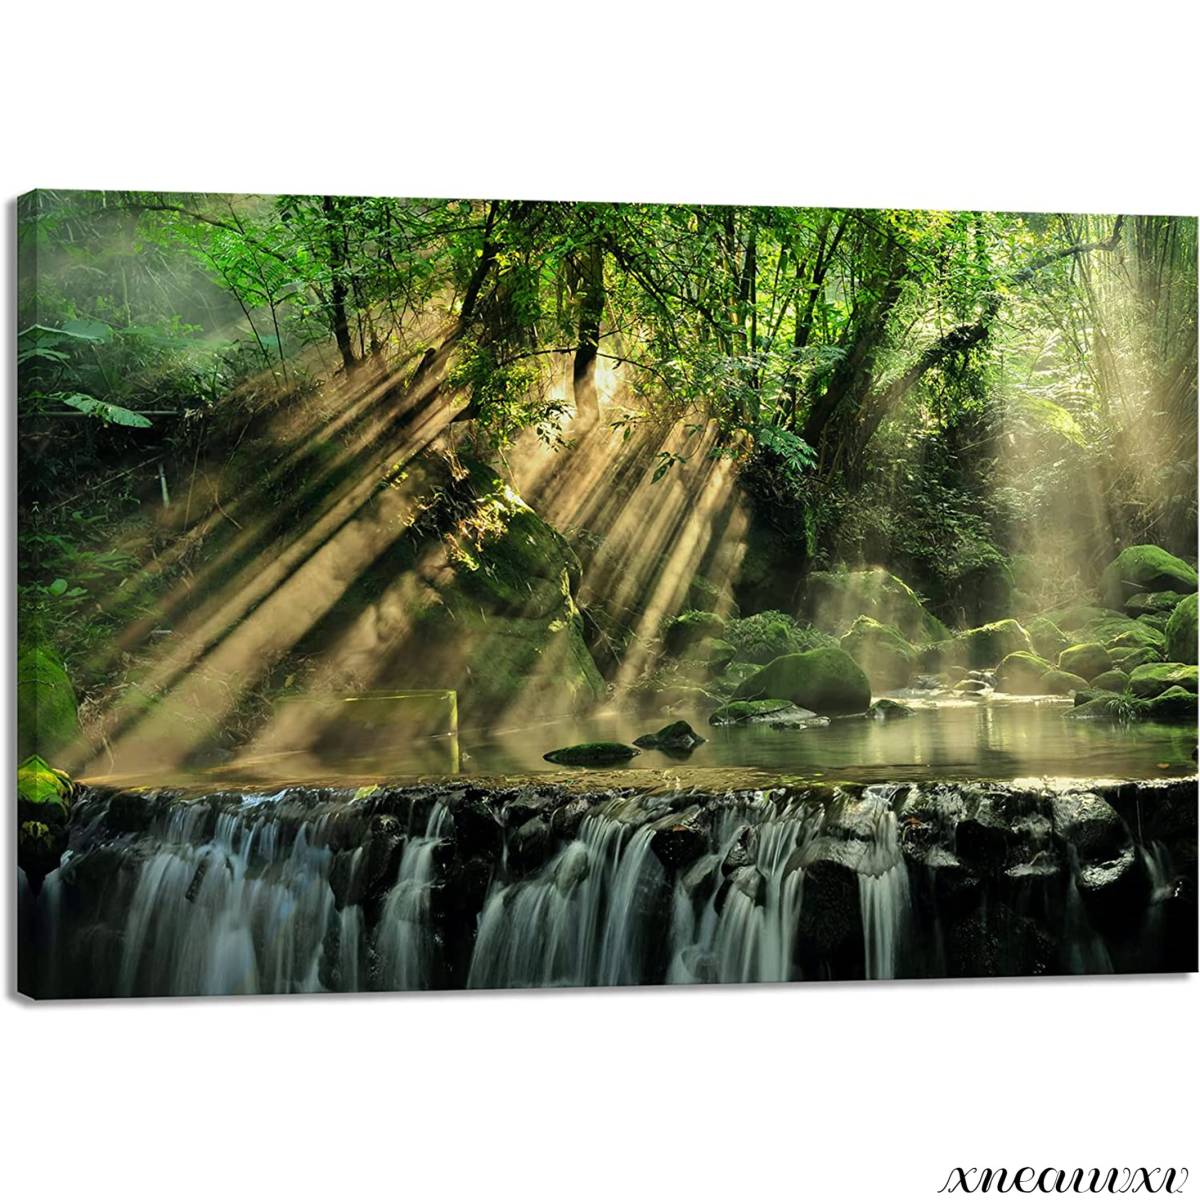  nature scenery art panel nature forest. middle light interior ornament part shop decoration equipment ornament . canvas picture stylish better fortune abroad art appreciation pattern change 